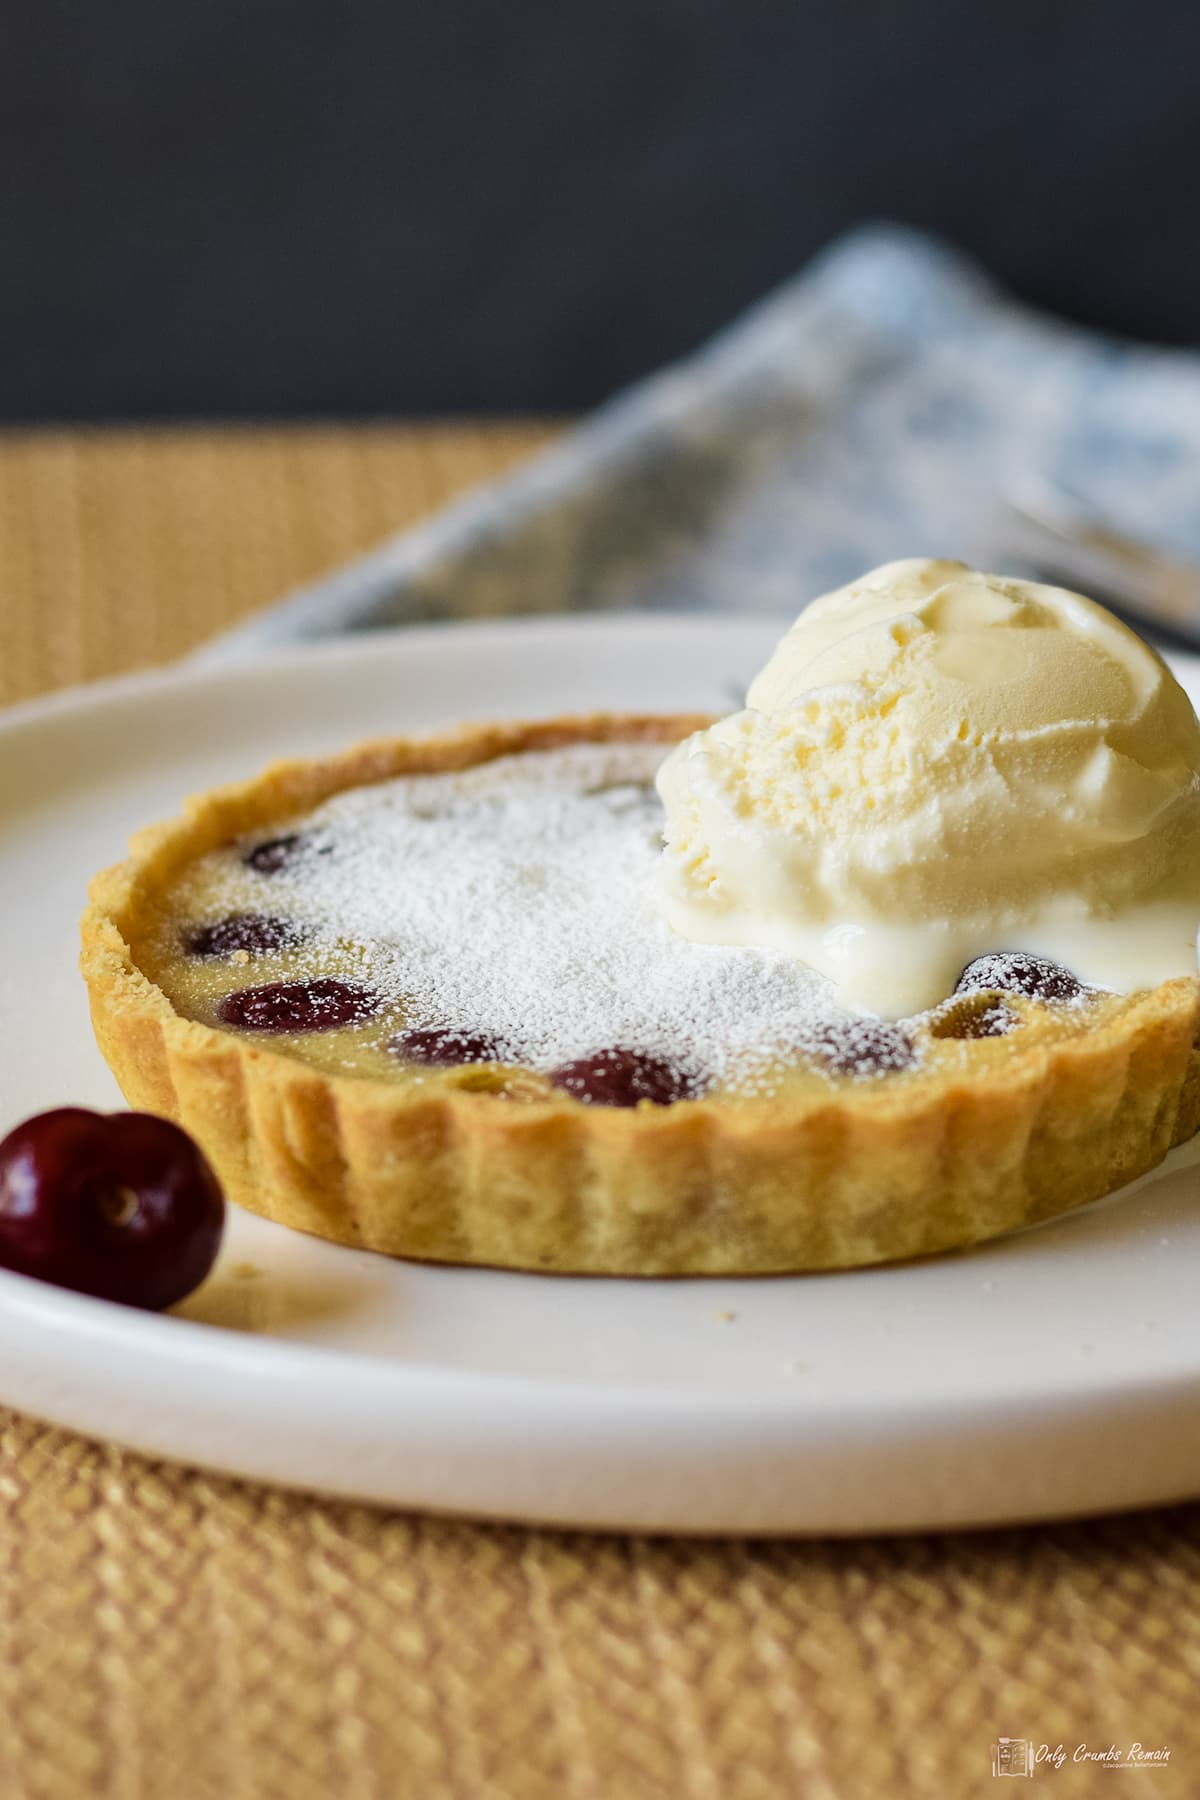 Cherry clafoutis served with ice cream on top